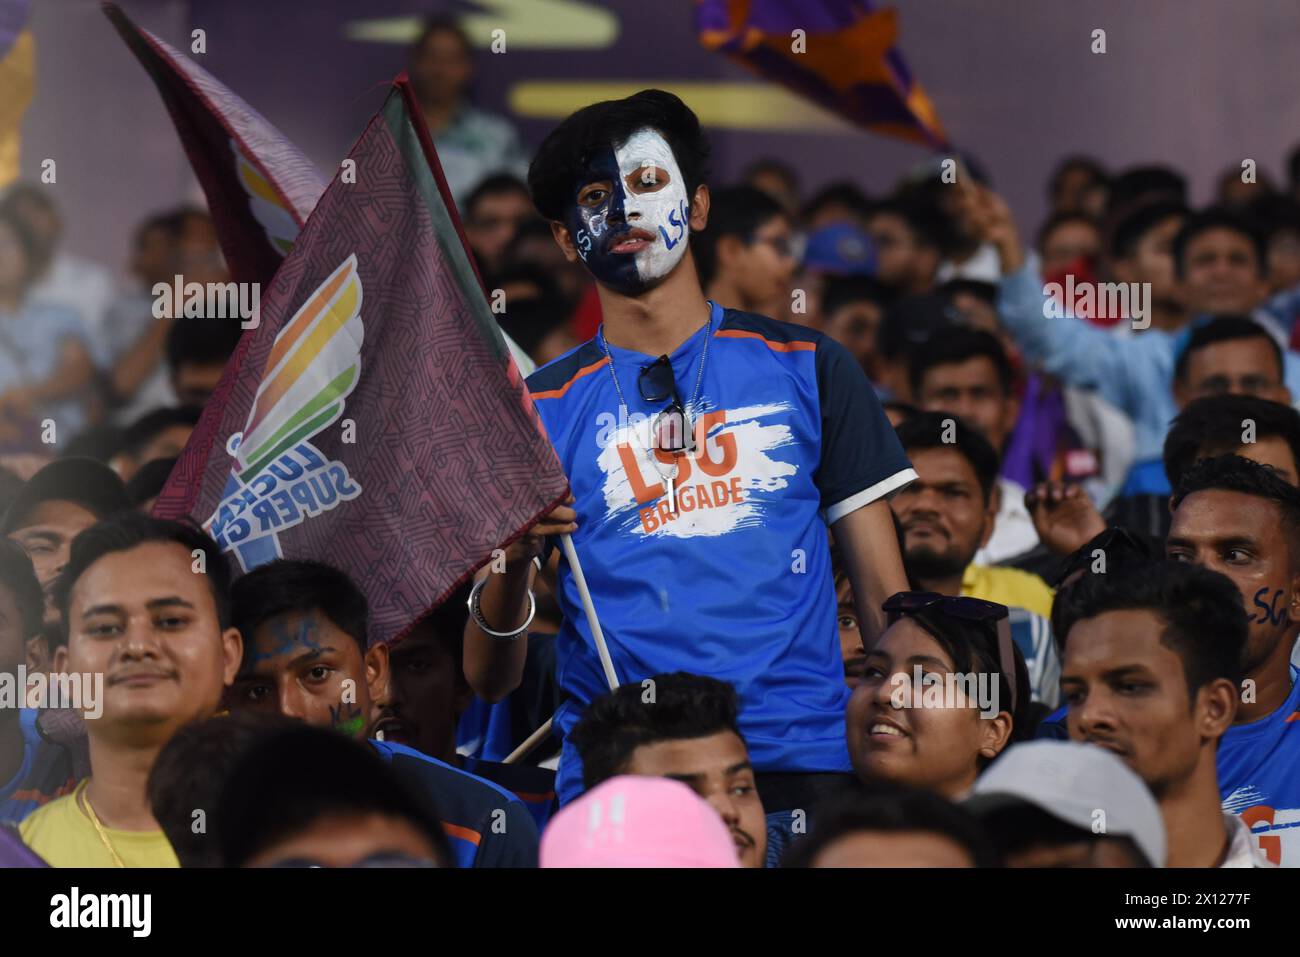 A Lucknow Super Giants fan with their face painted is seen during the Indian Premier League (IPL) Twenty 20 cricket match between Kolkata Knight Riders and Lucknow Super Giants at the Eden GardensKolkata Knight Riders beat Lucknow Super Giants by 8 wickets Stock Photo